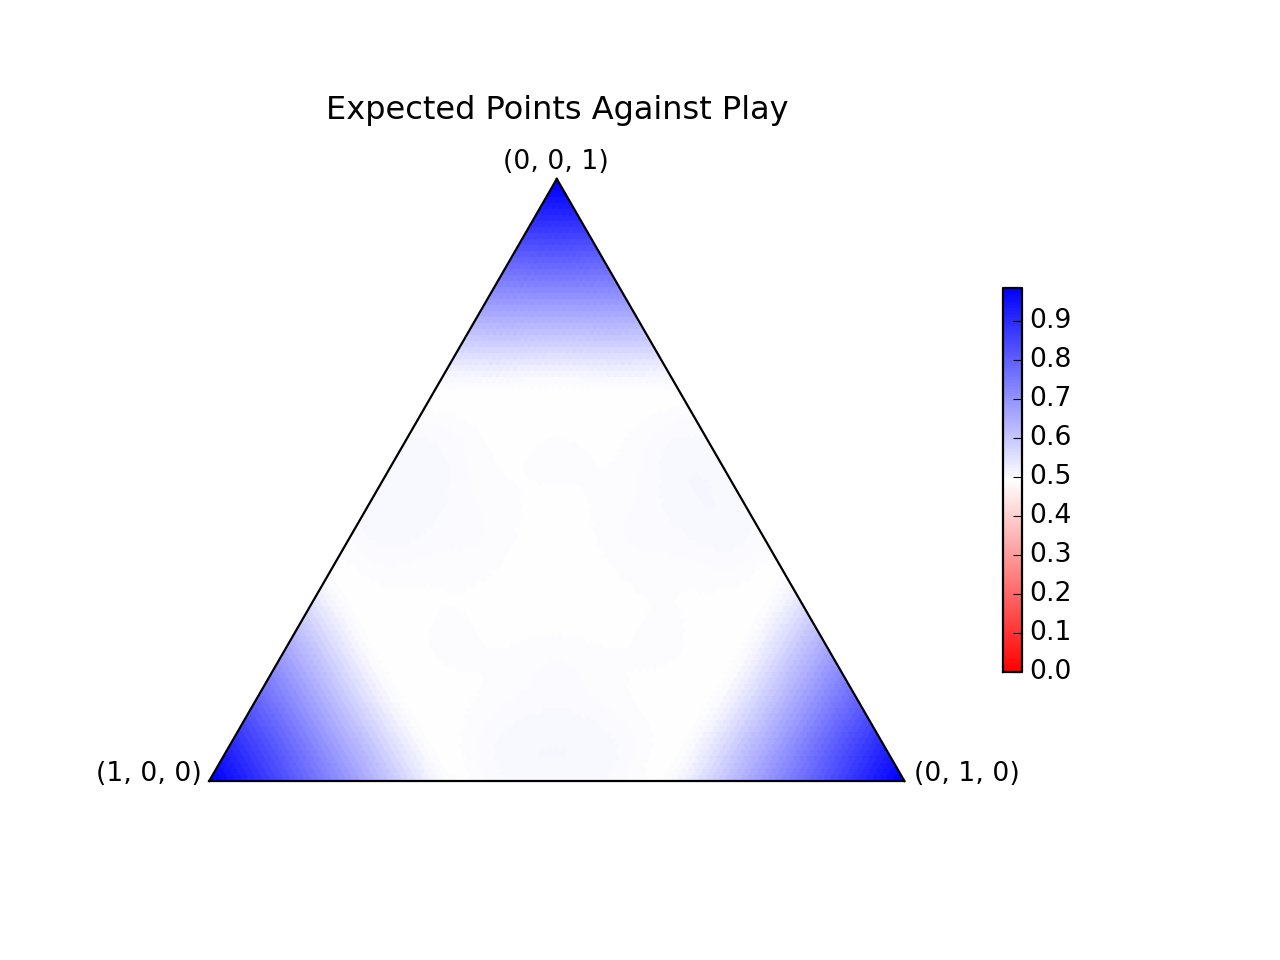 A plot on the equilateral triangle of expected points the optimal strategy gets against the play. The middle hexagon has 0.5 expected points, and the outer subtriangles have higher.